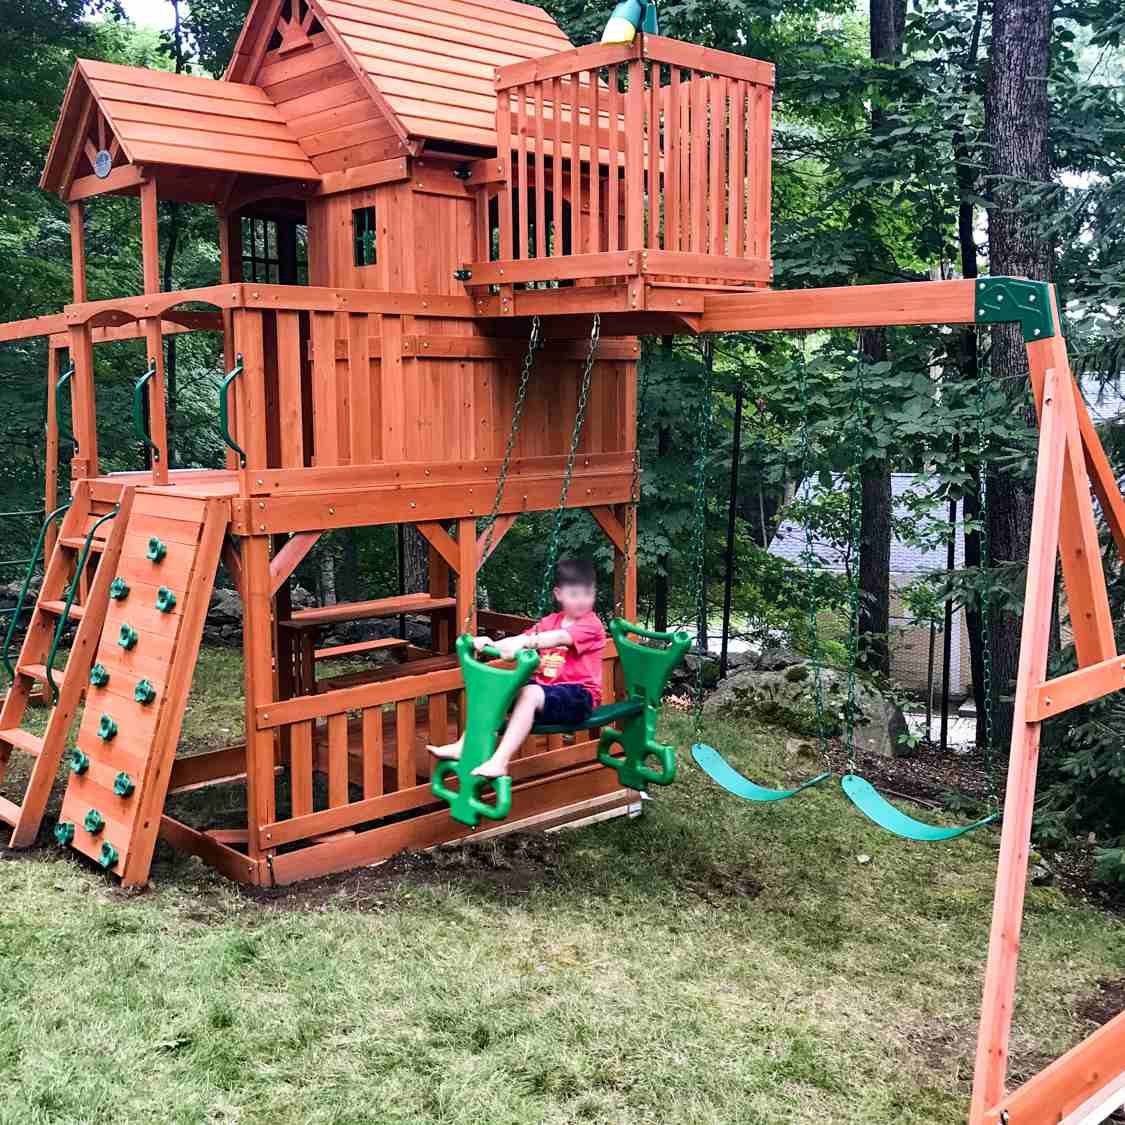 How To Make Your Own Diy Jungle Gym, Best Outdoor Jungle Gyms For Toddlers